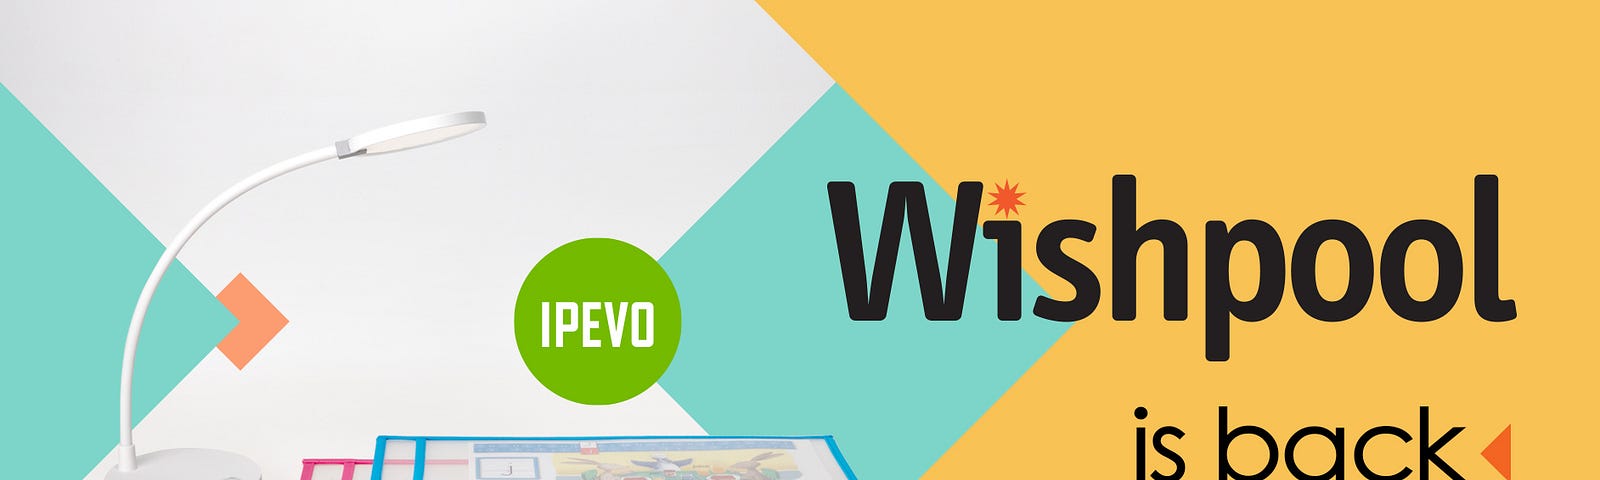 IPEVO Wishpool is back and check out the gifts we’ve in store for November!